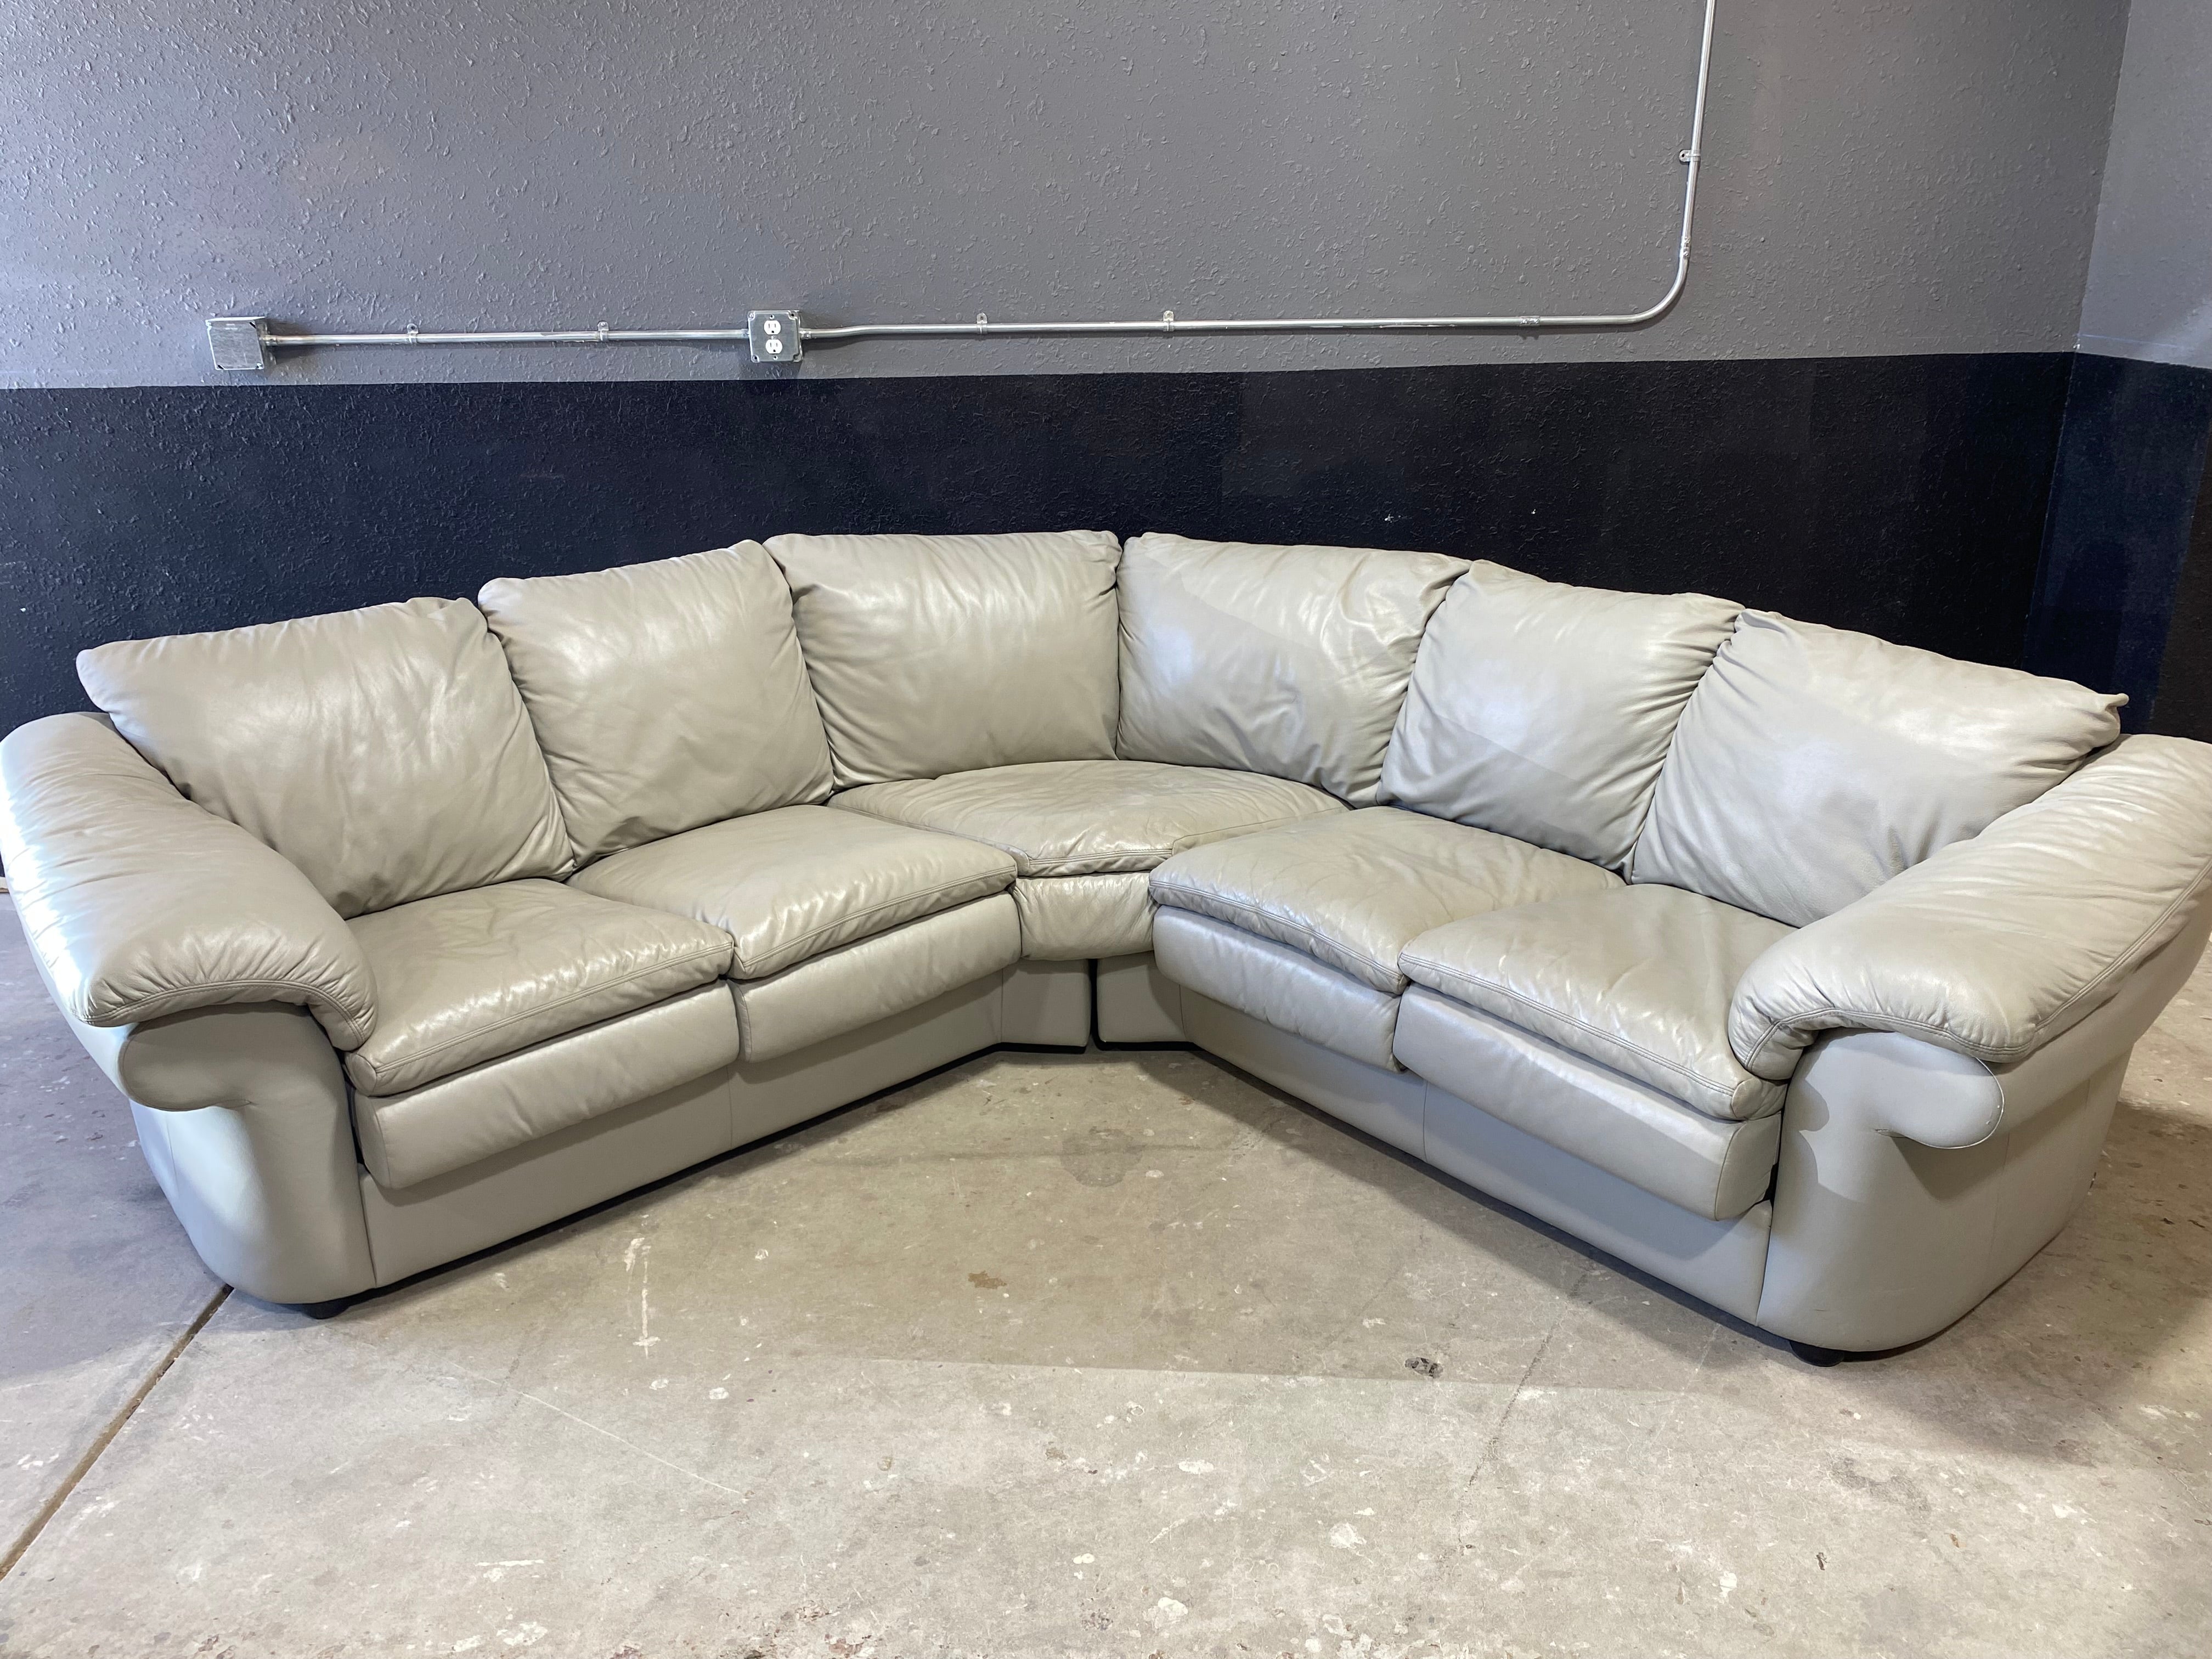 American Leather Light Gray U-Shaped Sectional